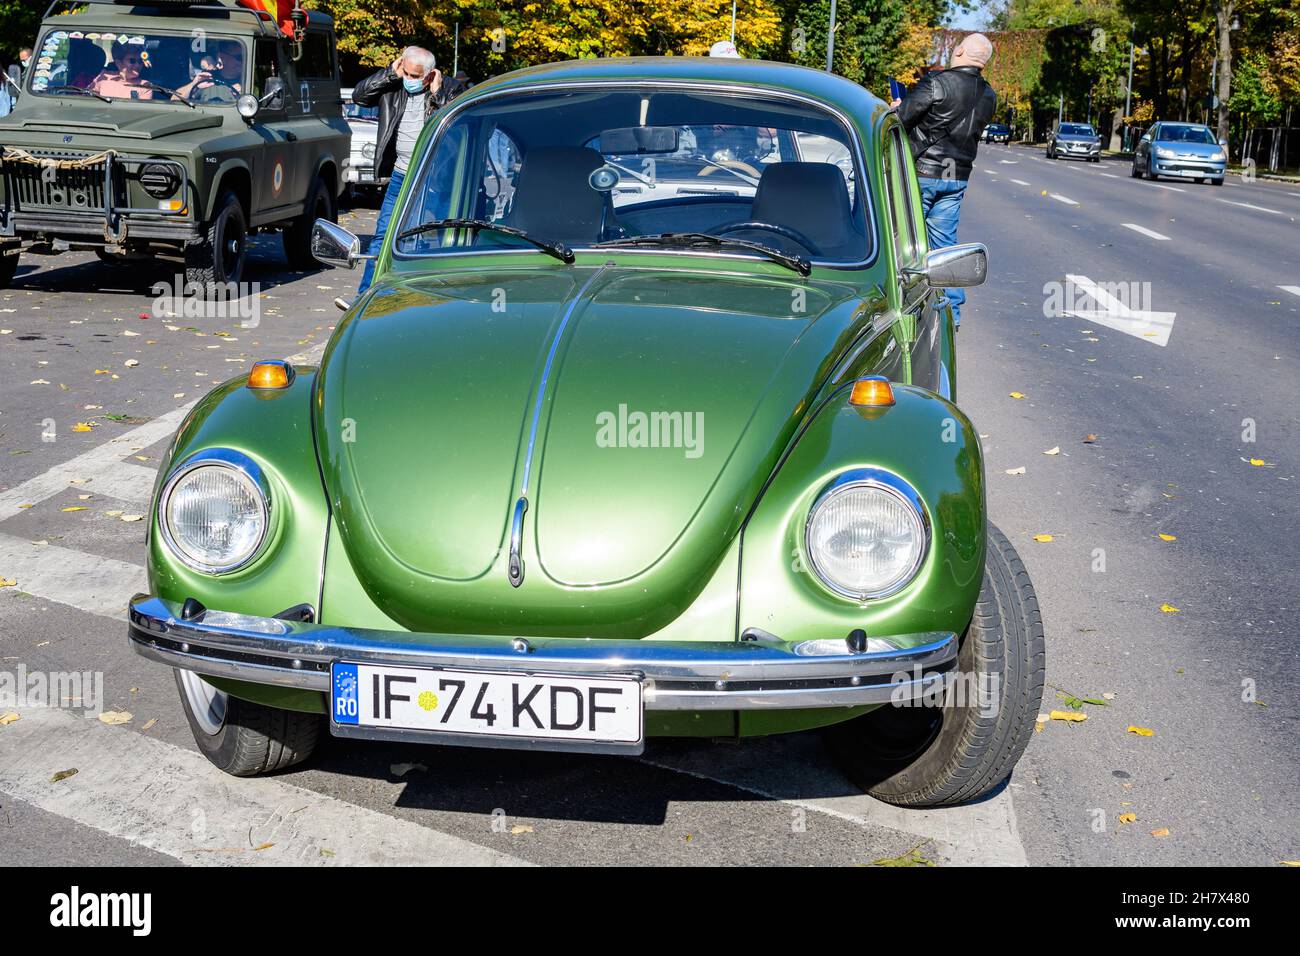 Bucharest, Romania, 24 October 2021: One vivid green Volkswagen Beetle German vintage car in traffic in a street at an event for vintage cars collecti Stock Photo